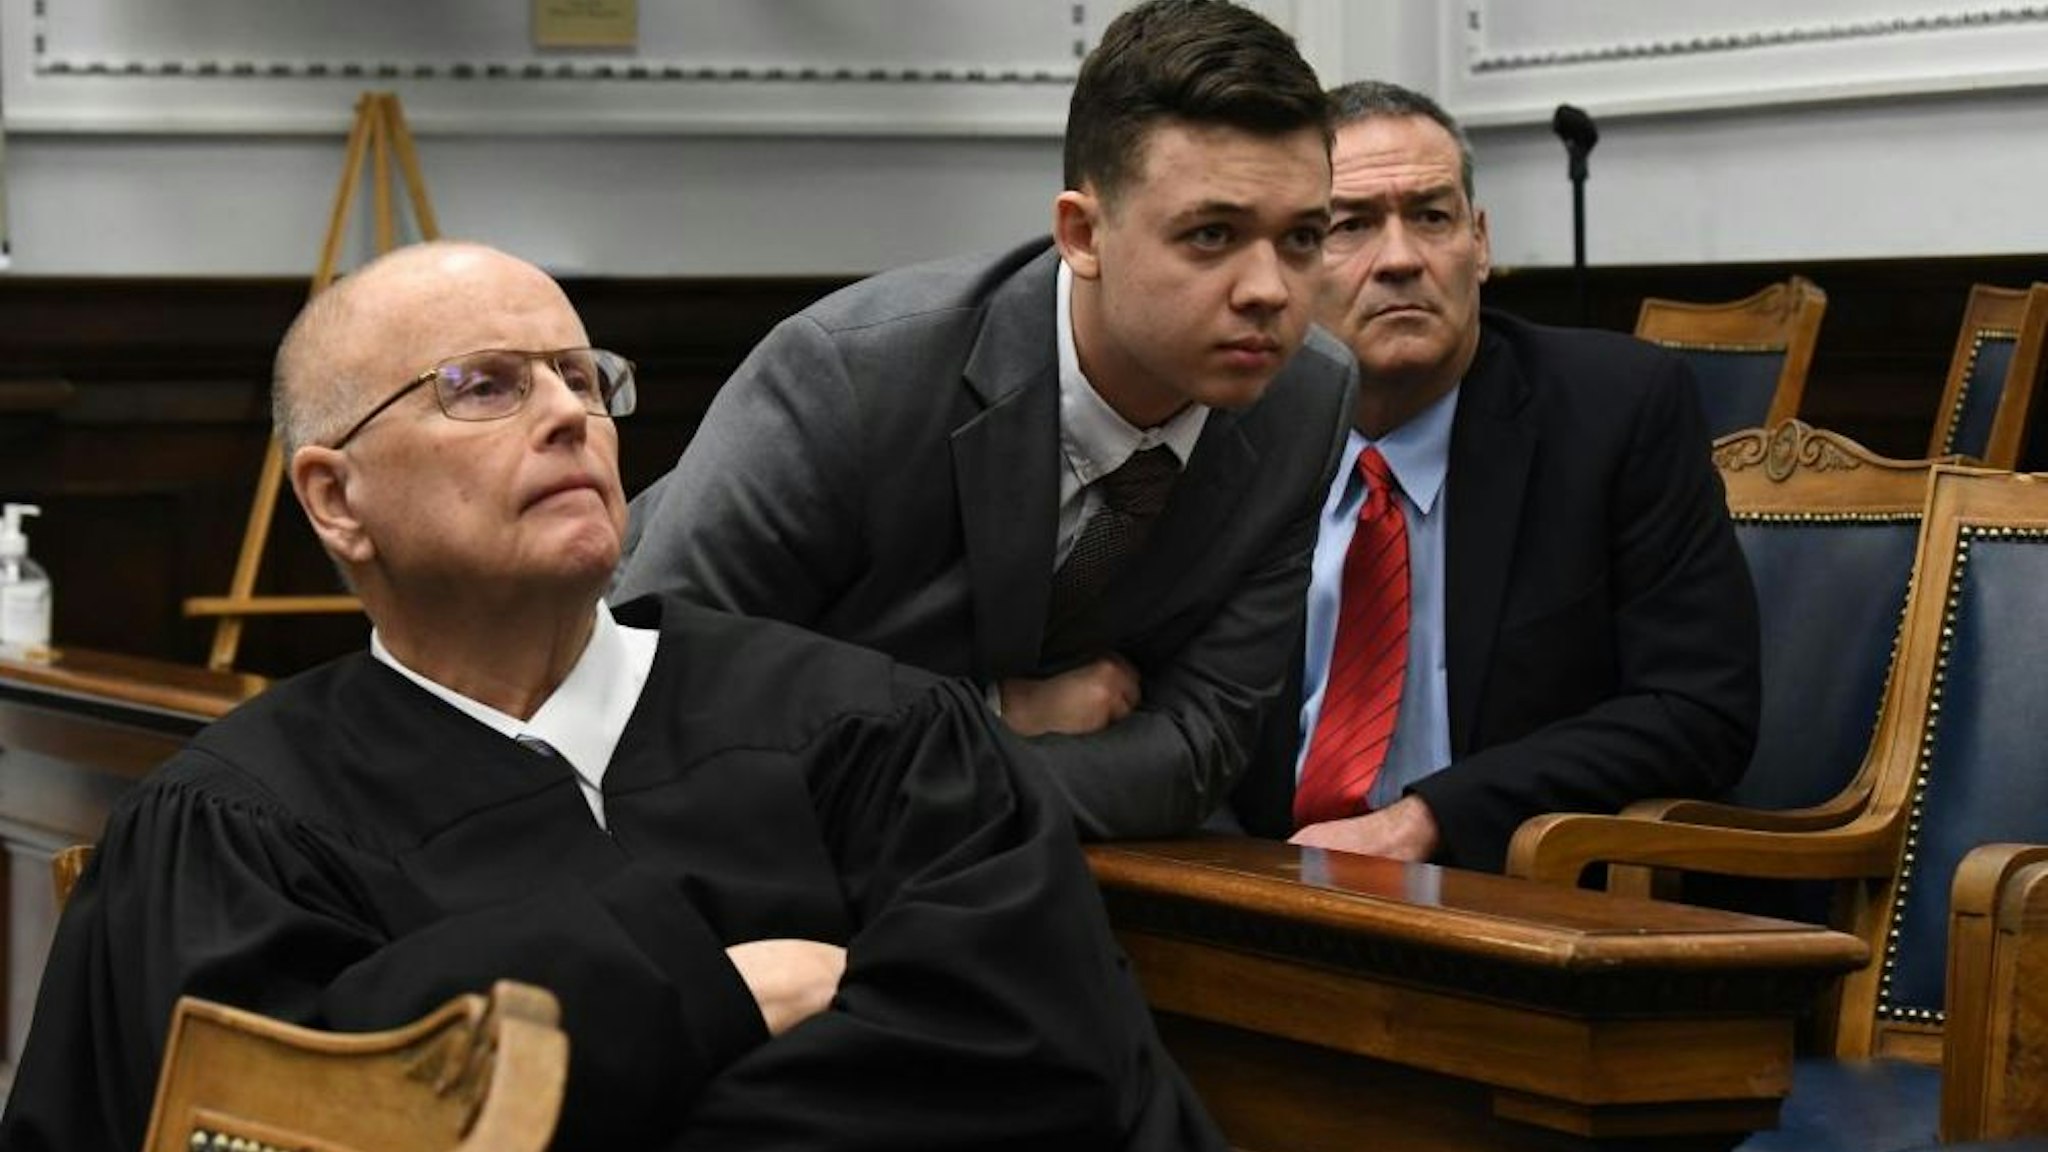 JUDGE BRUCE E. SCHROEDER is seated in front of a large video monitor as KYLE RITTENHOUSE and attorneys for both sides argue about a video in Kenosha (Wisconsin) Circuit Court on November 12, 2021 in Kenosha, Wisconsin.